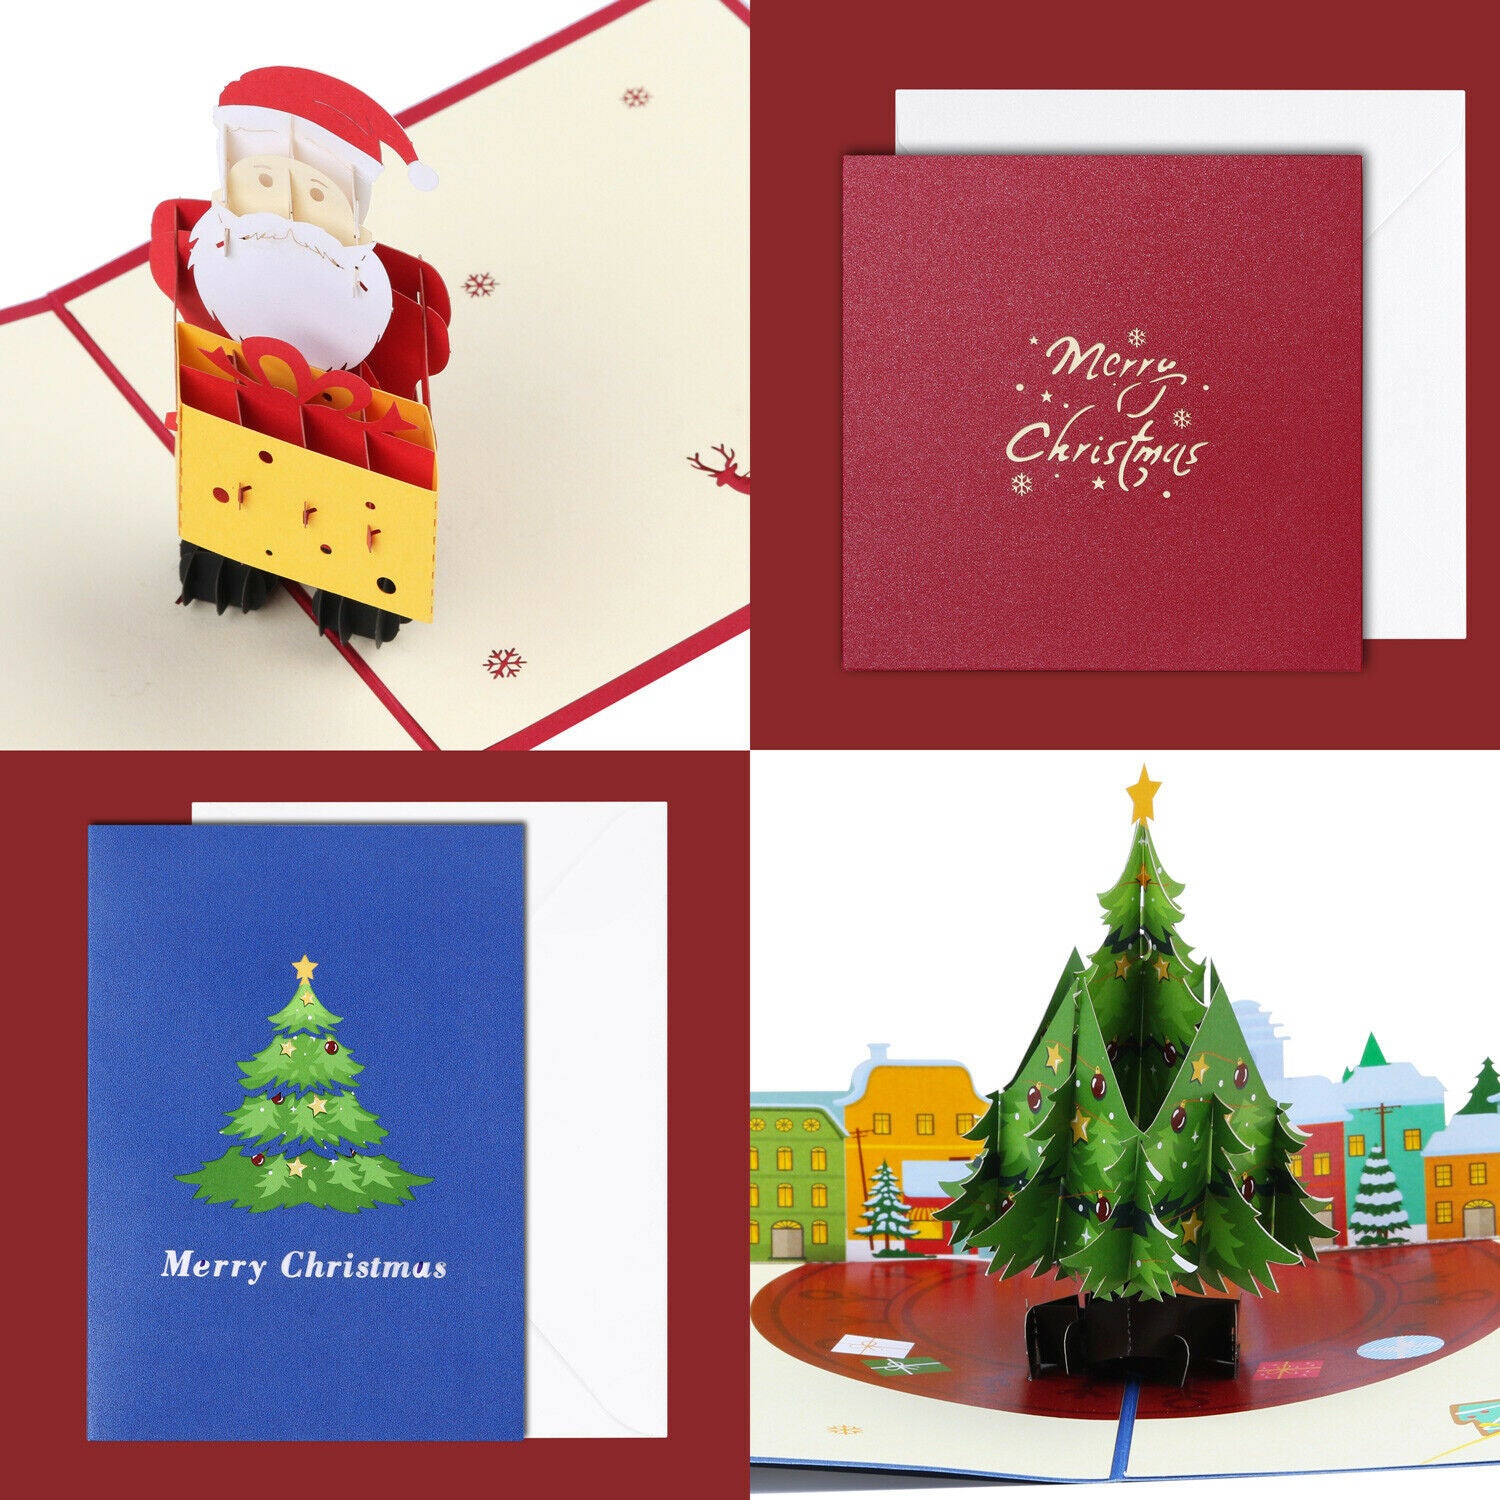 Hand Made Exquisite 3D Christmas Pop Up Cards with Envelopes, 2Pcs (Navy + Red)